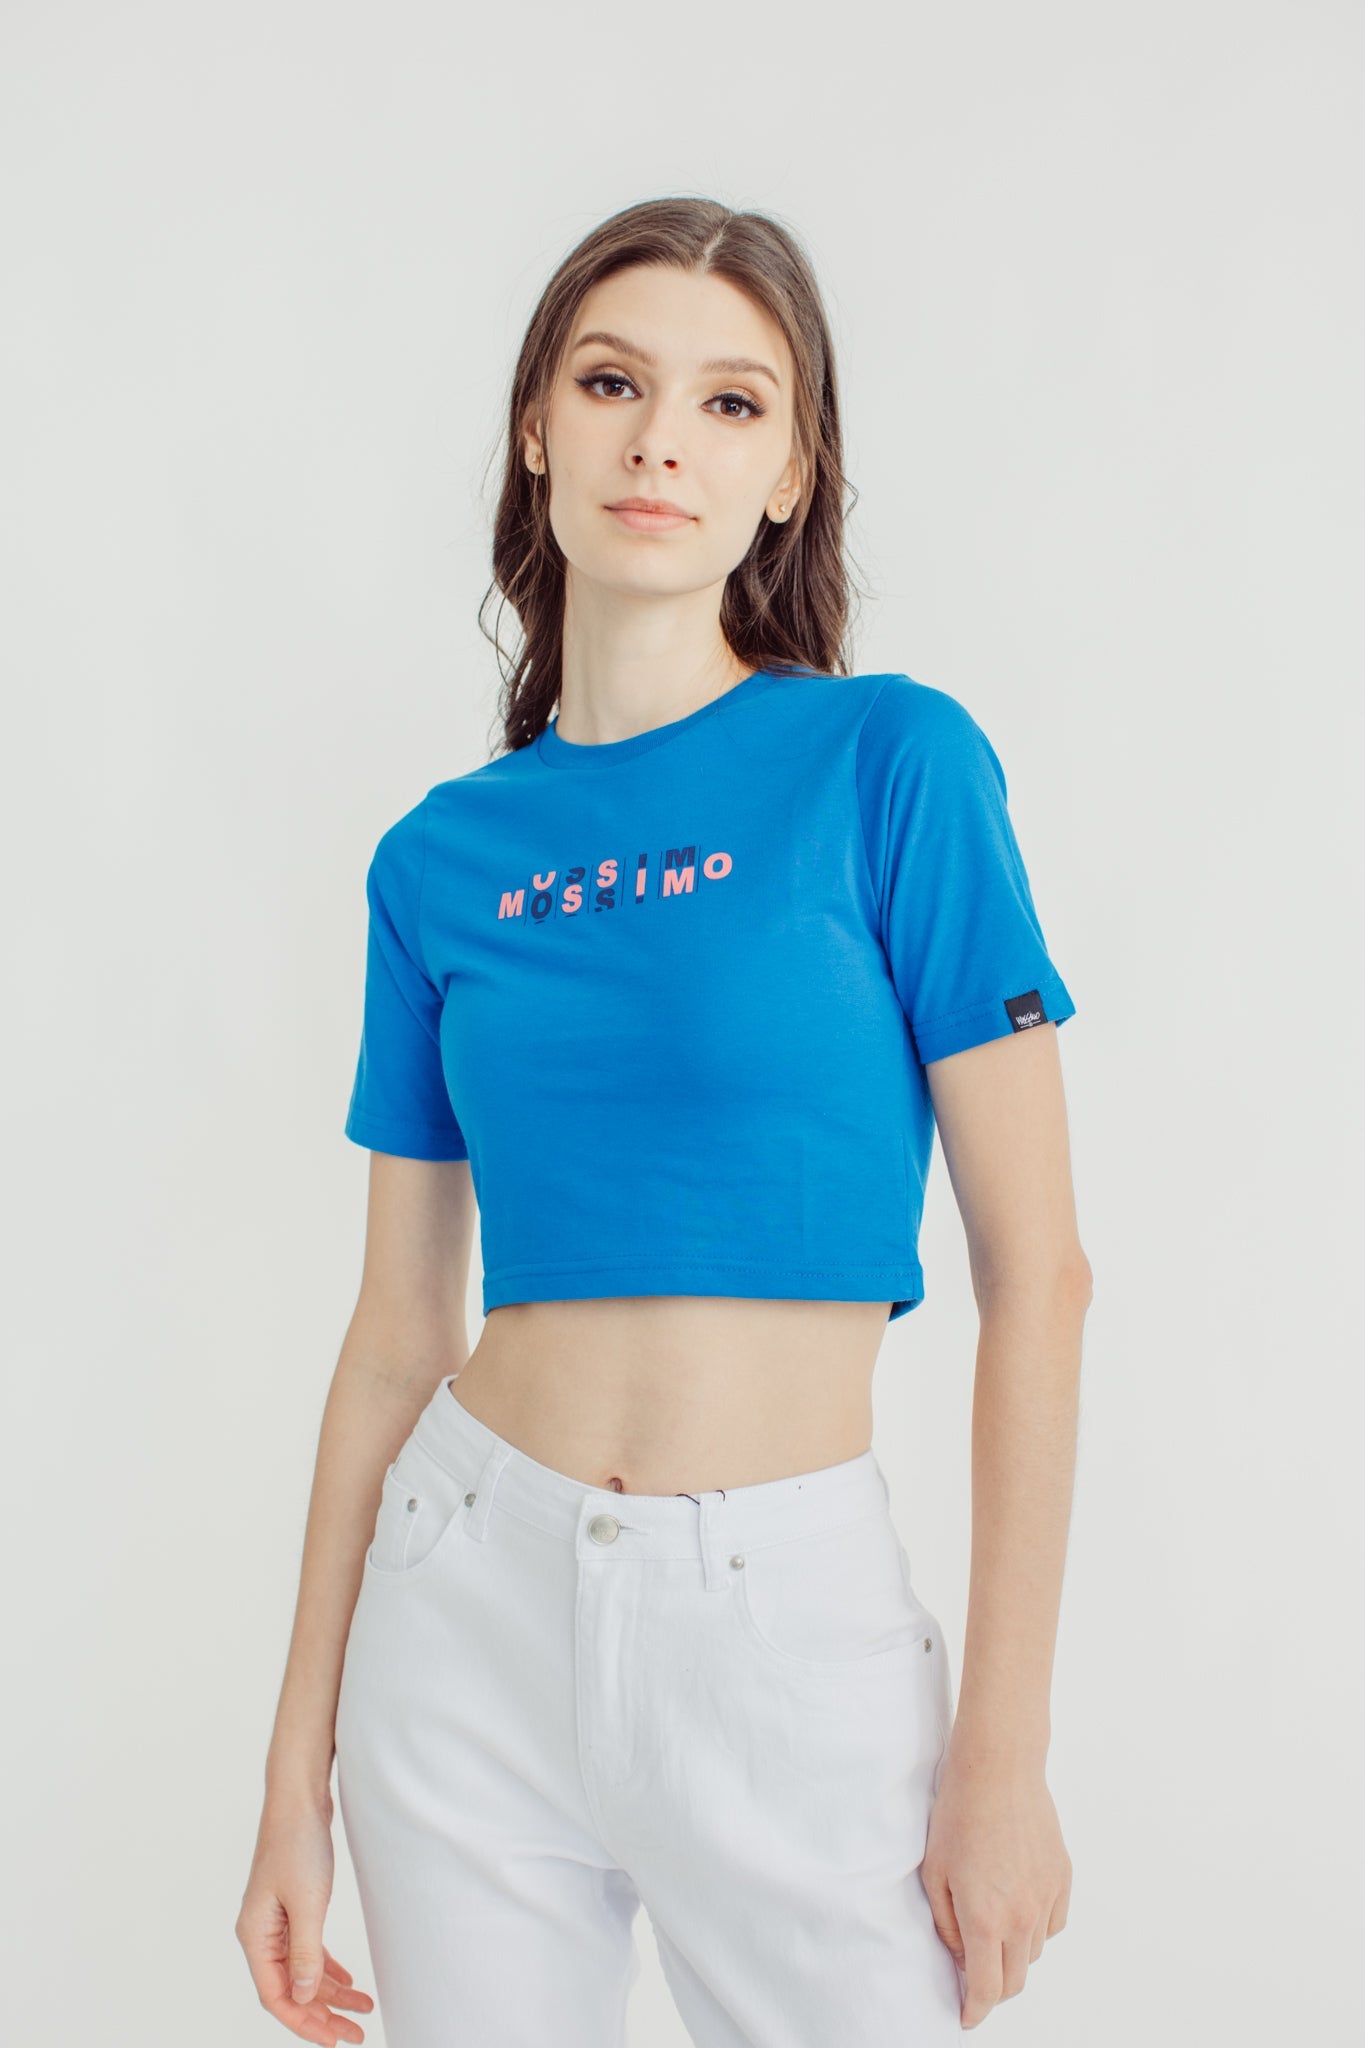 Daphne with Mossimo Slot Machine Design Retro Cropped Fit Tee - Mossimo PH